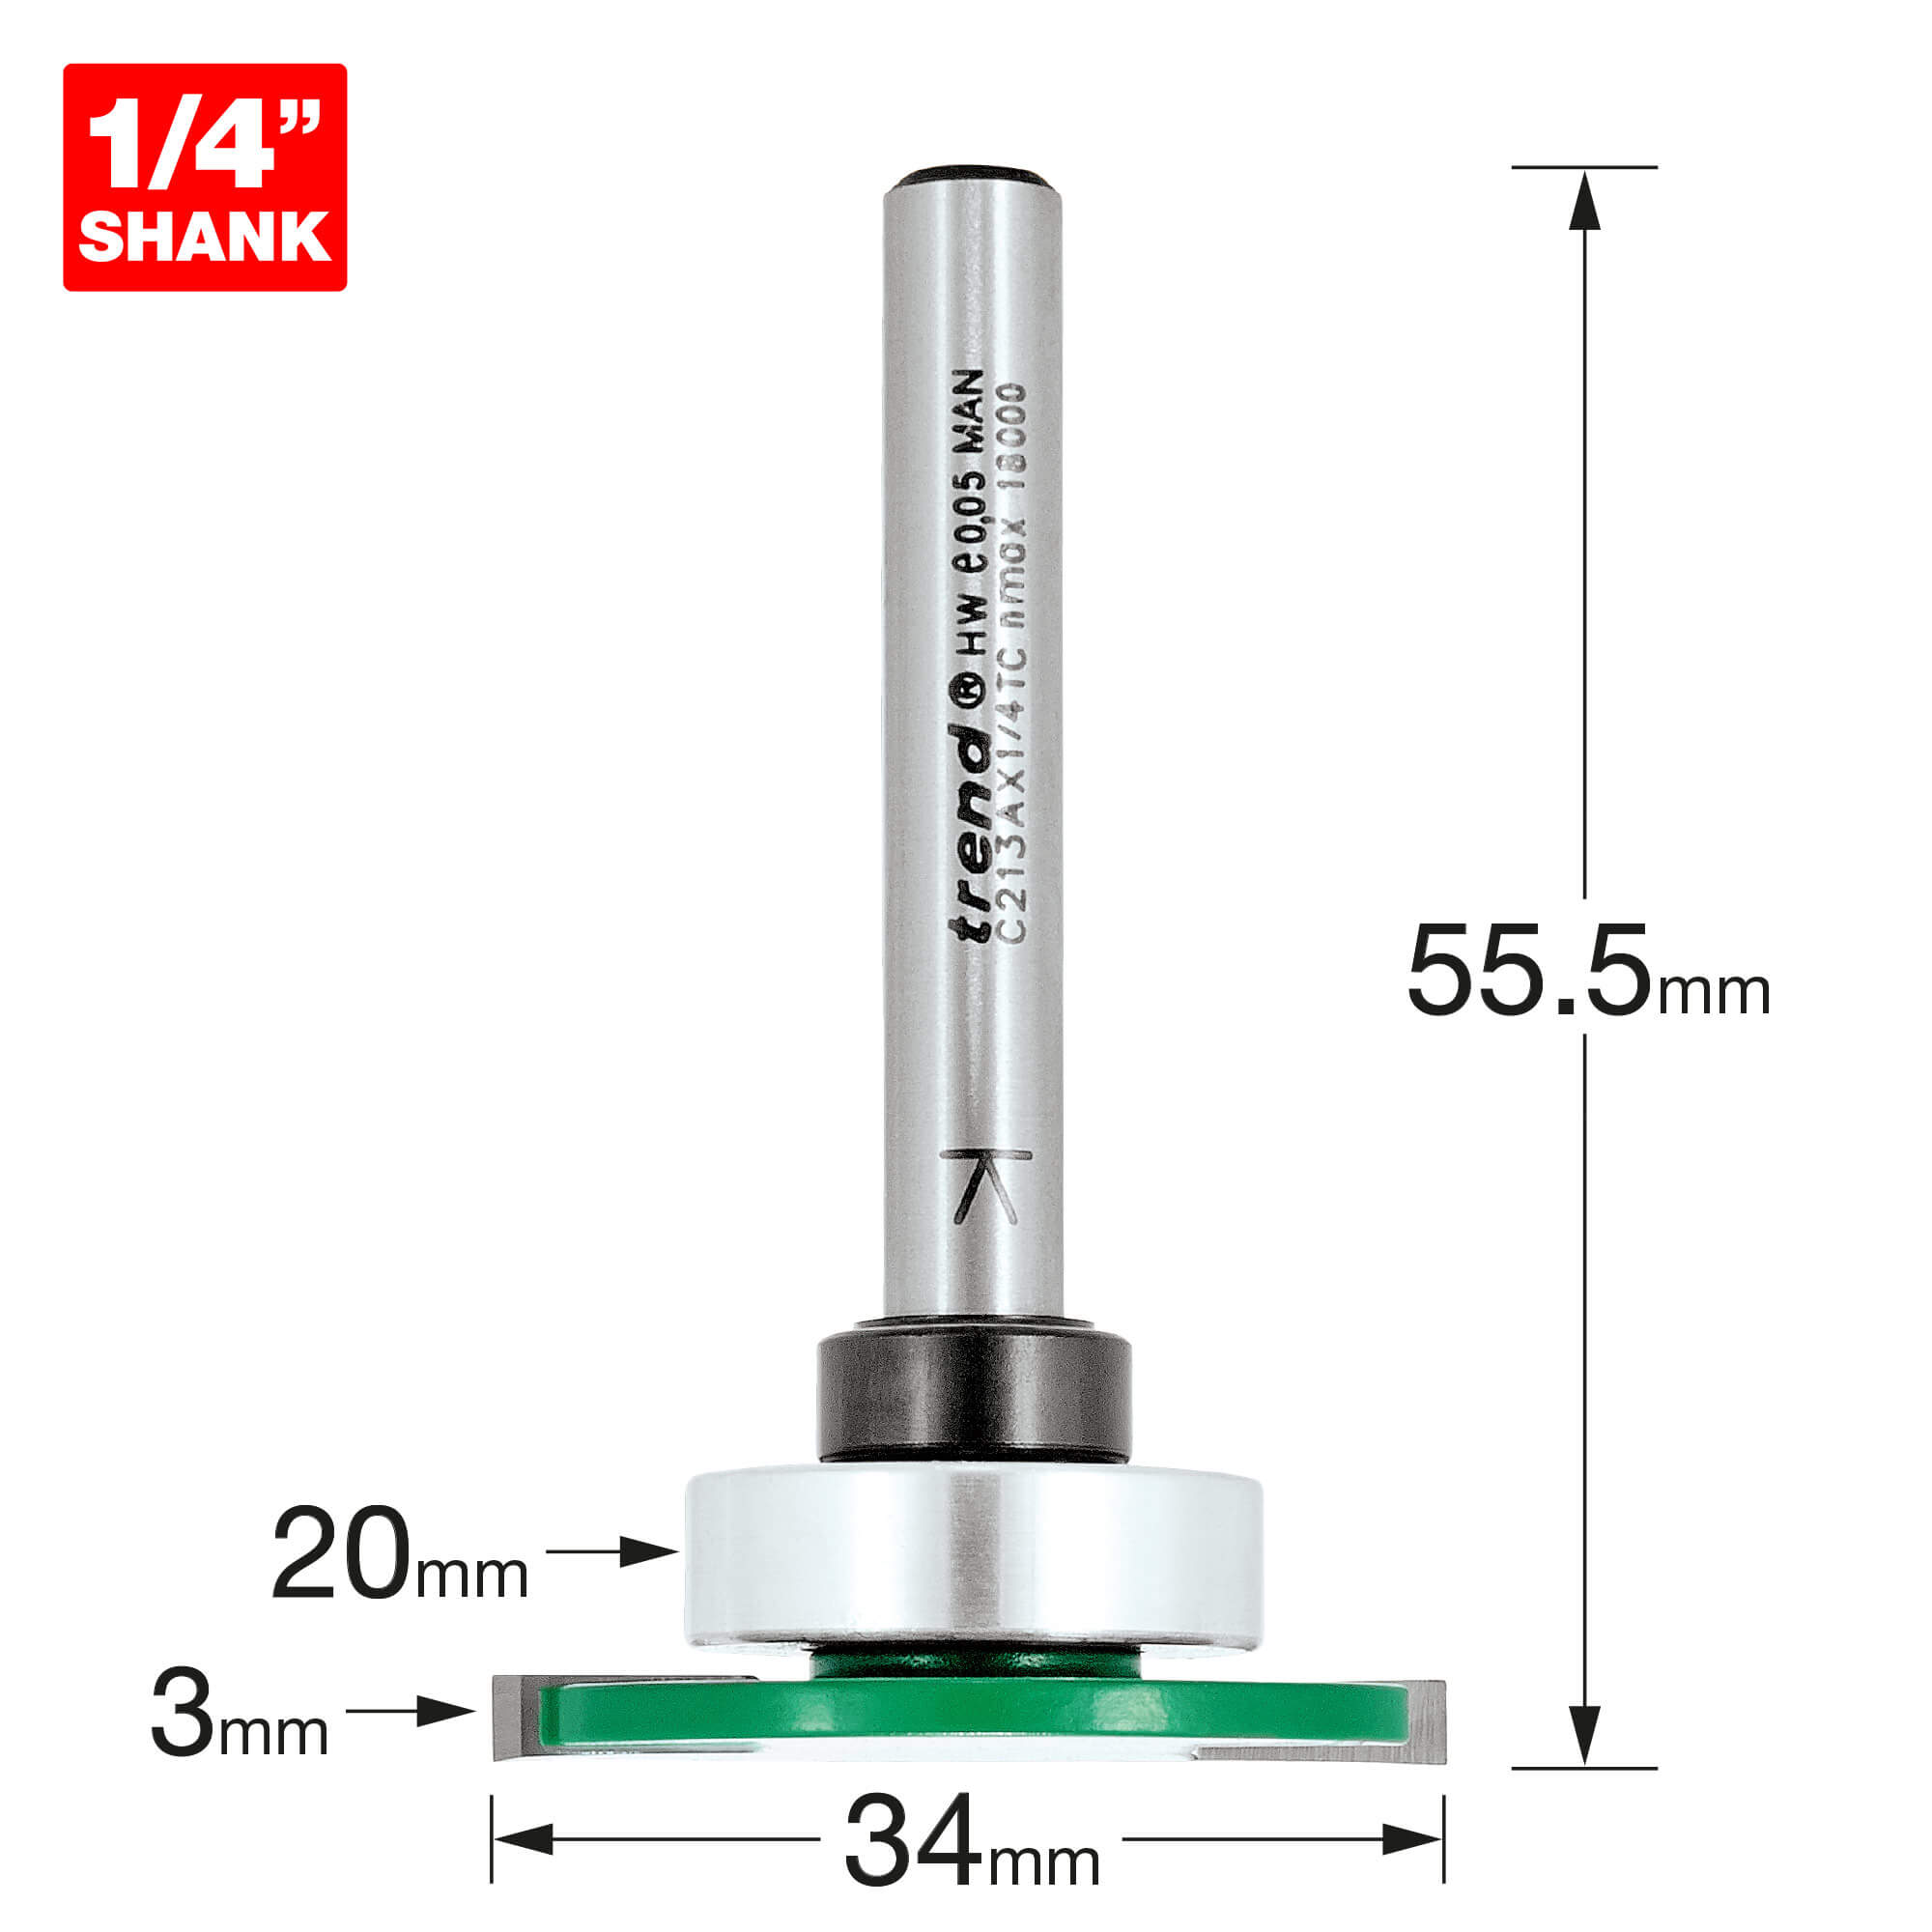 Image of Trend CRAFTPRO Weatherseal Groover Router Cutter 34mm 3mm 1/4"